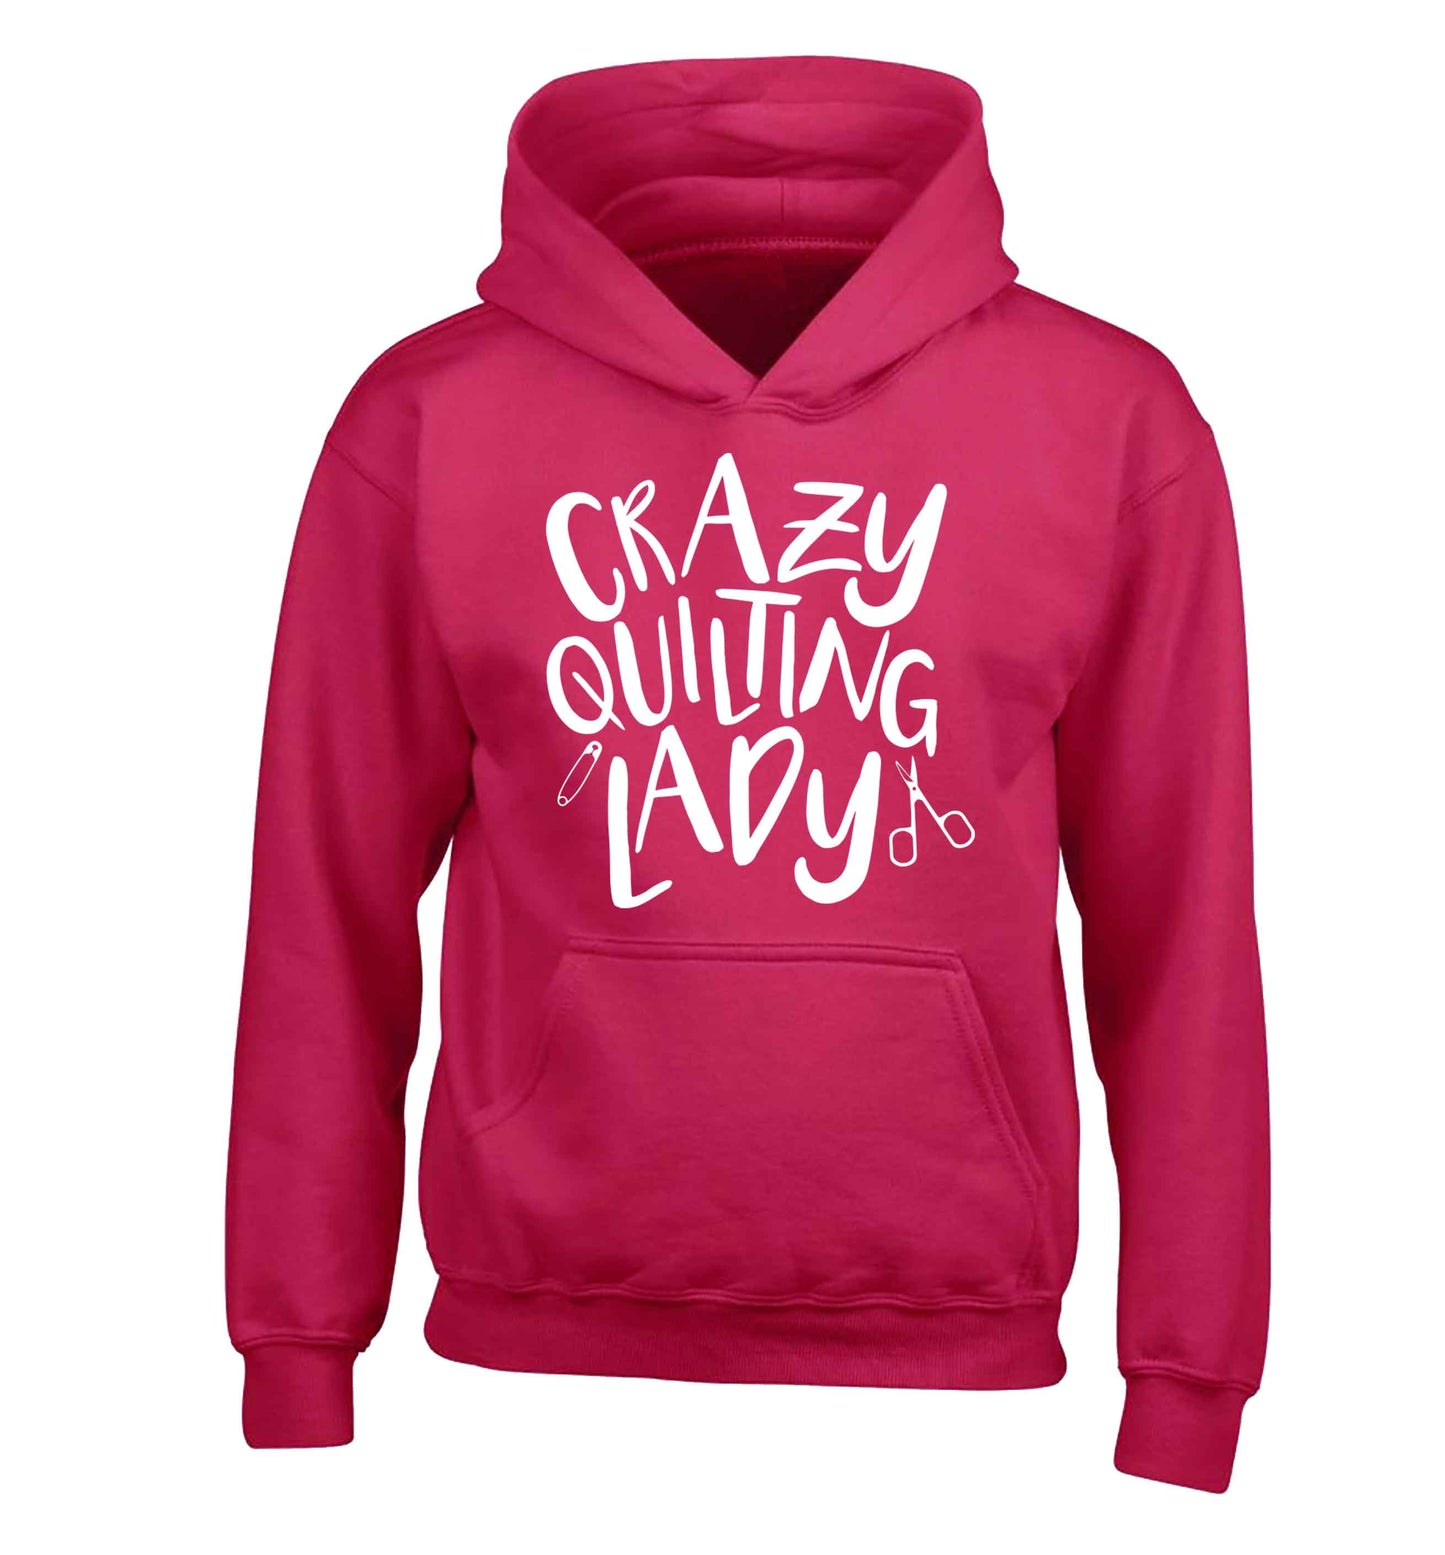 Crazy quilting lady children's pink hoodie 12-13 Years